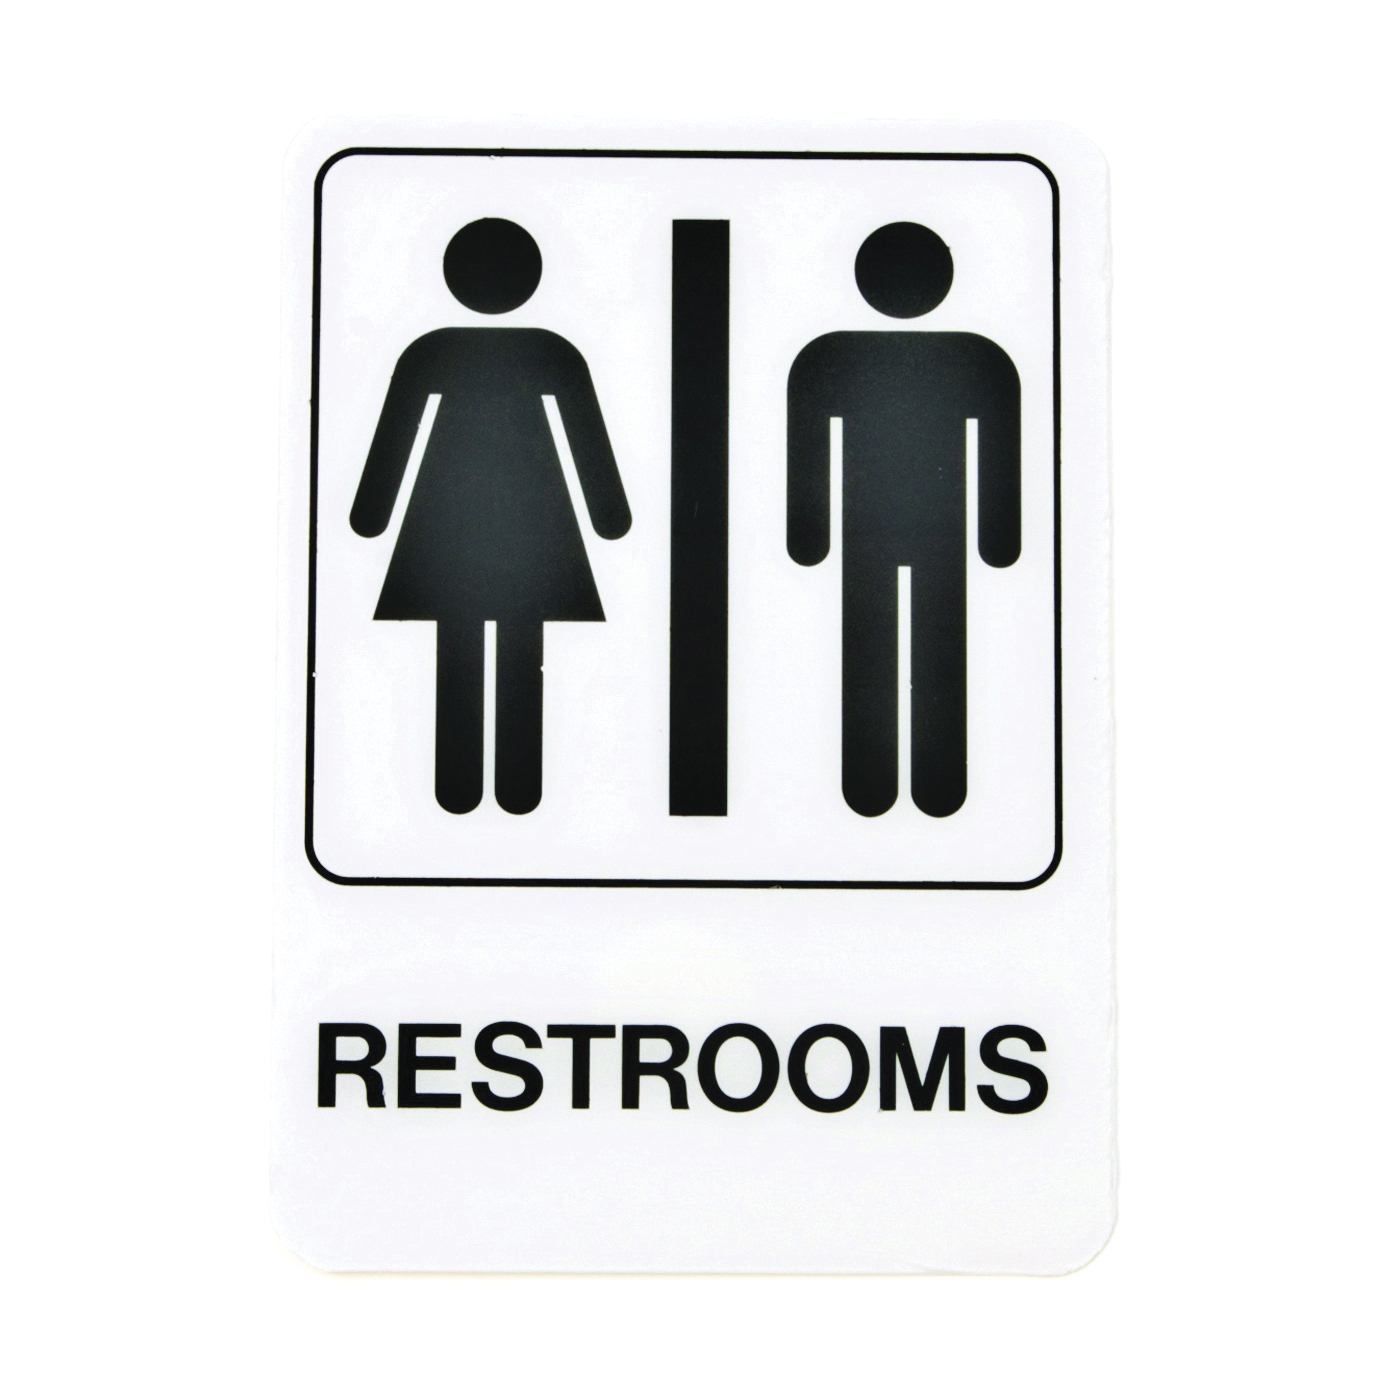 D-23 Graphic Sign, Rectangular, REST ROOM, Black Legend, White Background, Plastic, 5 in W x 7 in H Dimensions